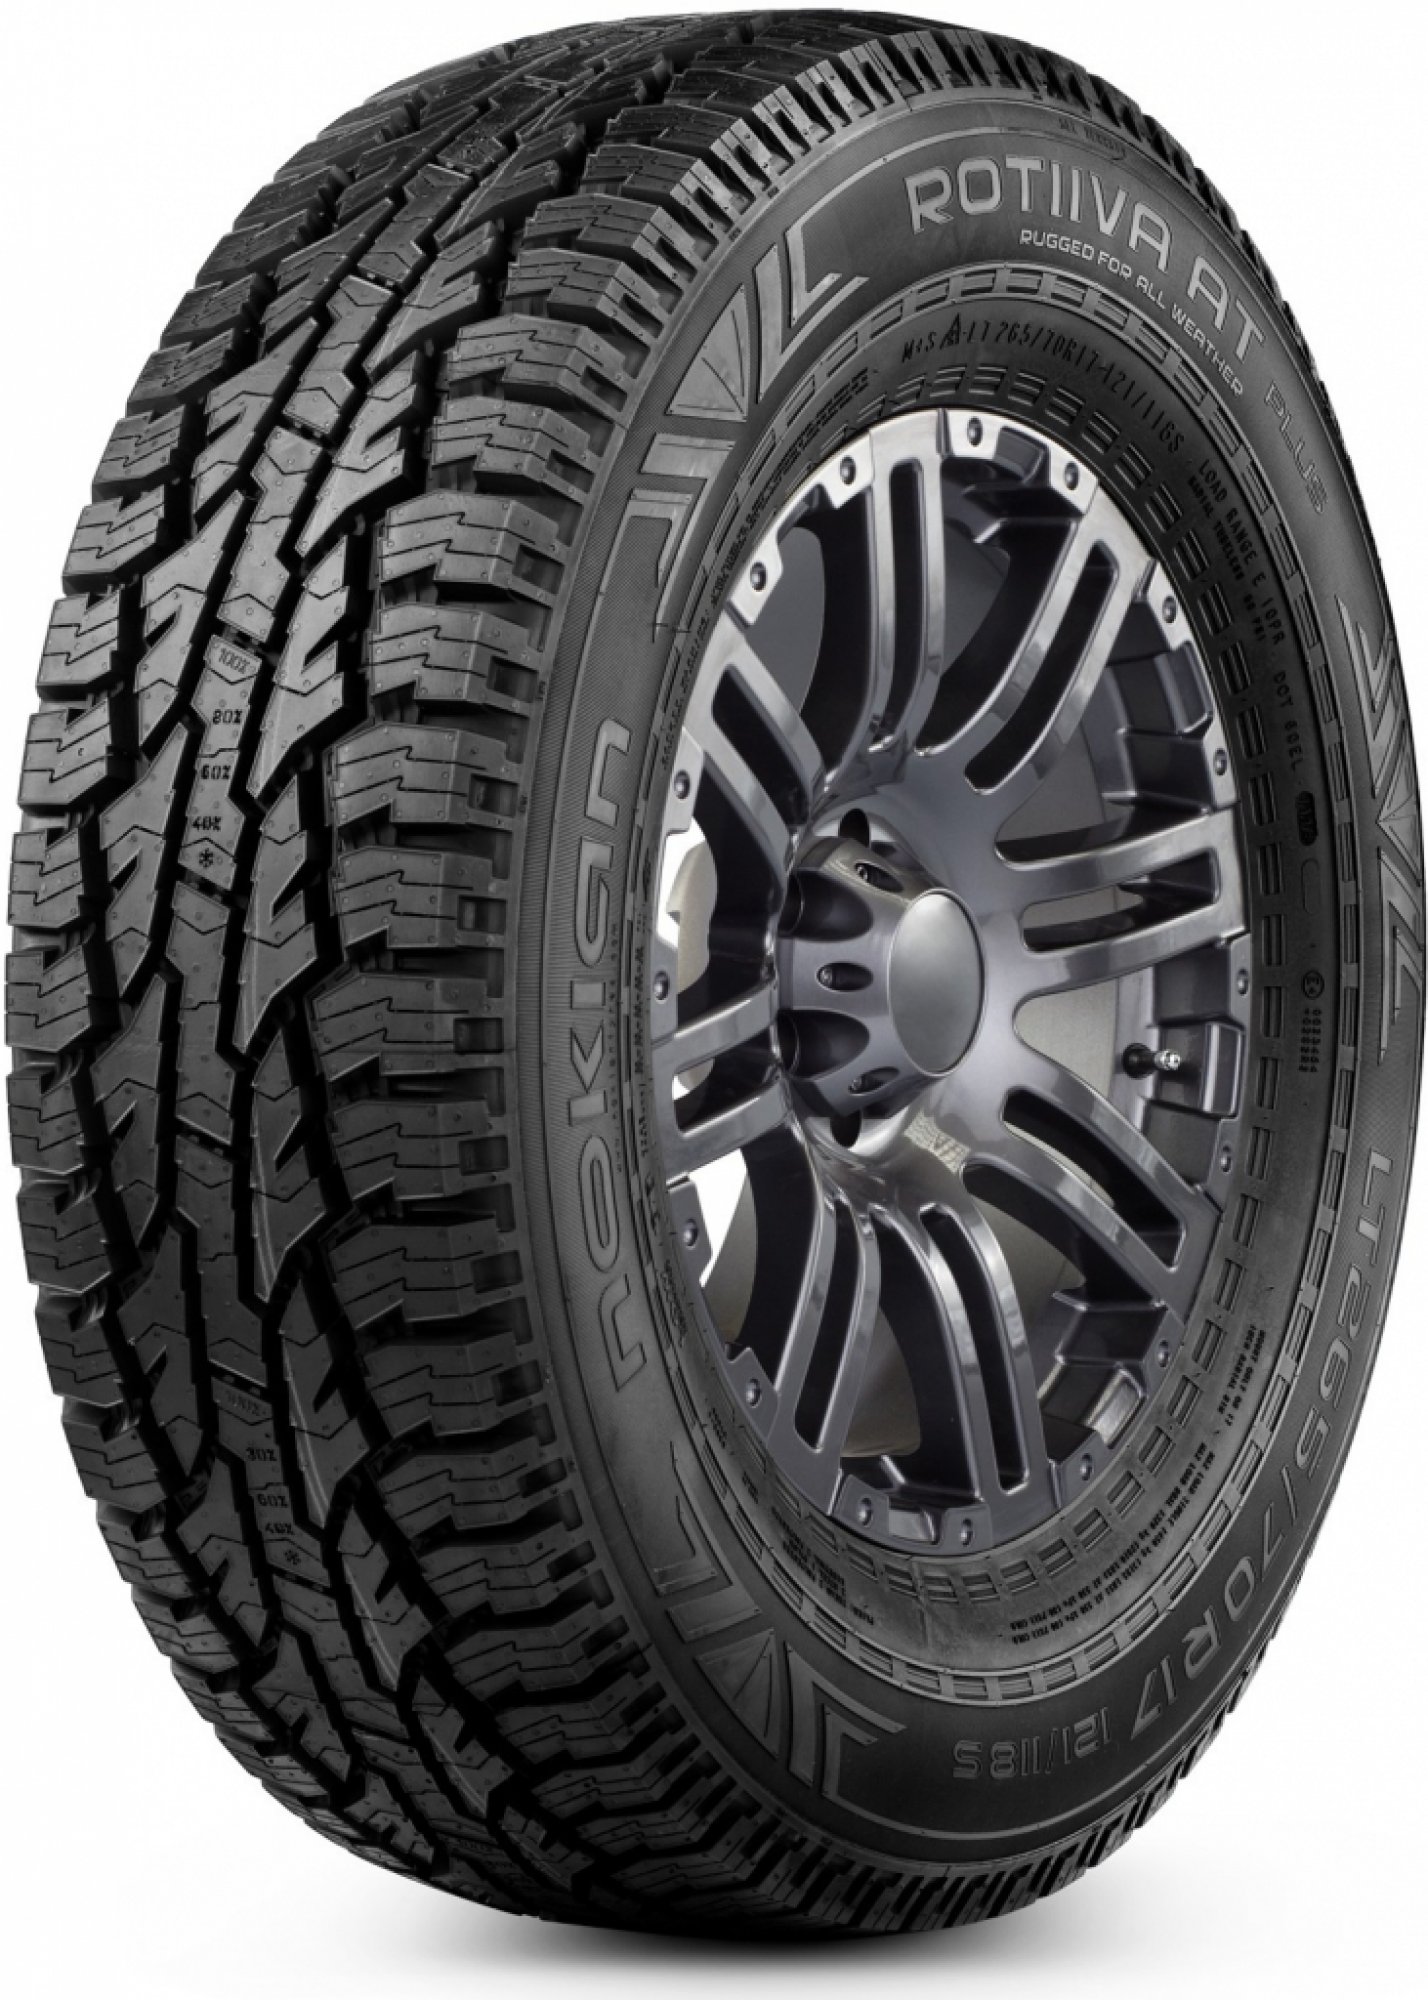 NOKIAN TYRES ROTIIVA AT PLUS 275/55 R 20 120/117S